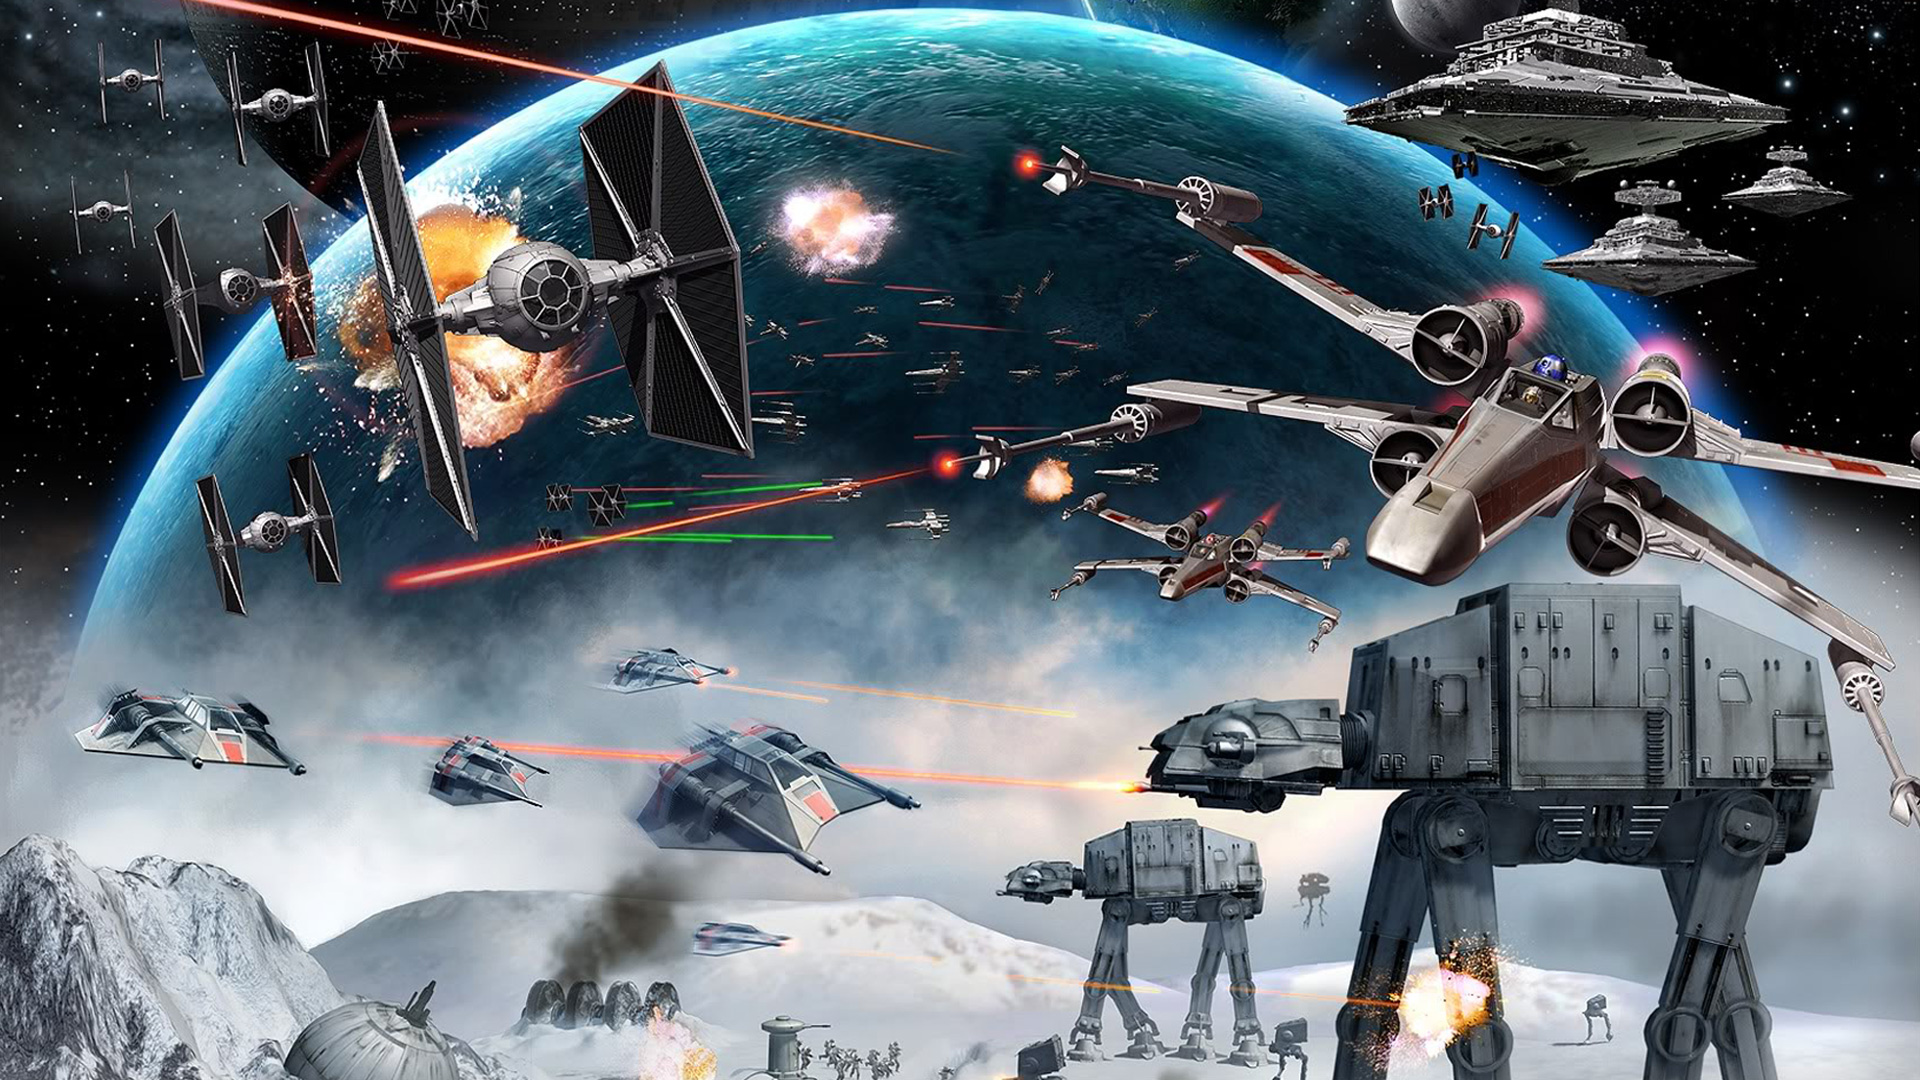 FizX Entertainment Huge Star Wars Wallpapers Collection